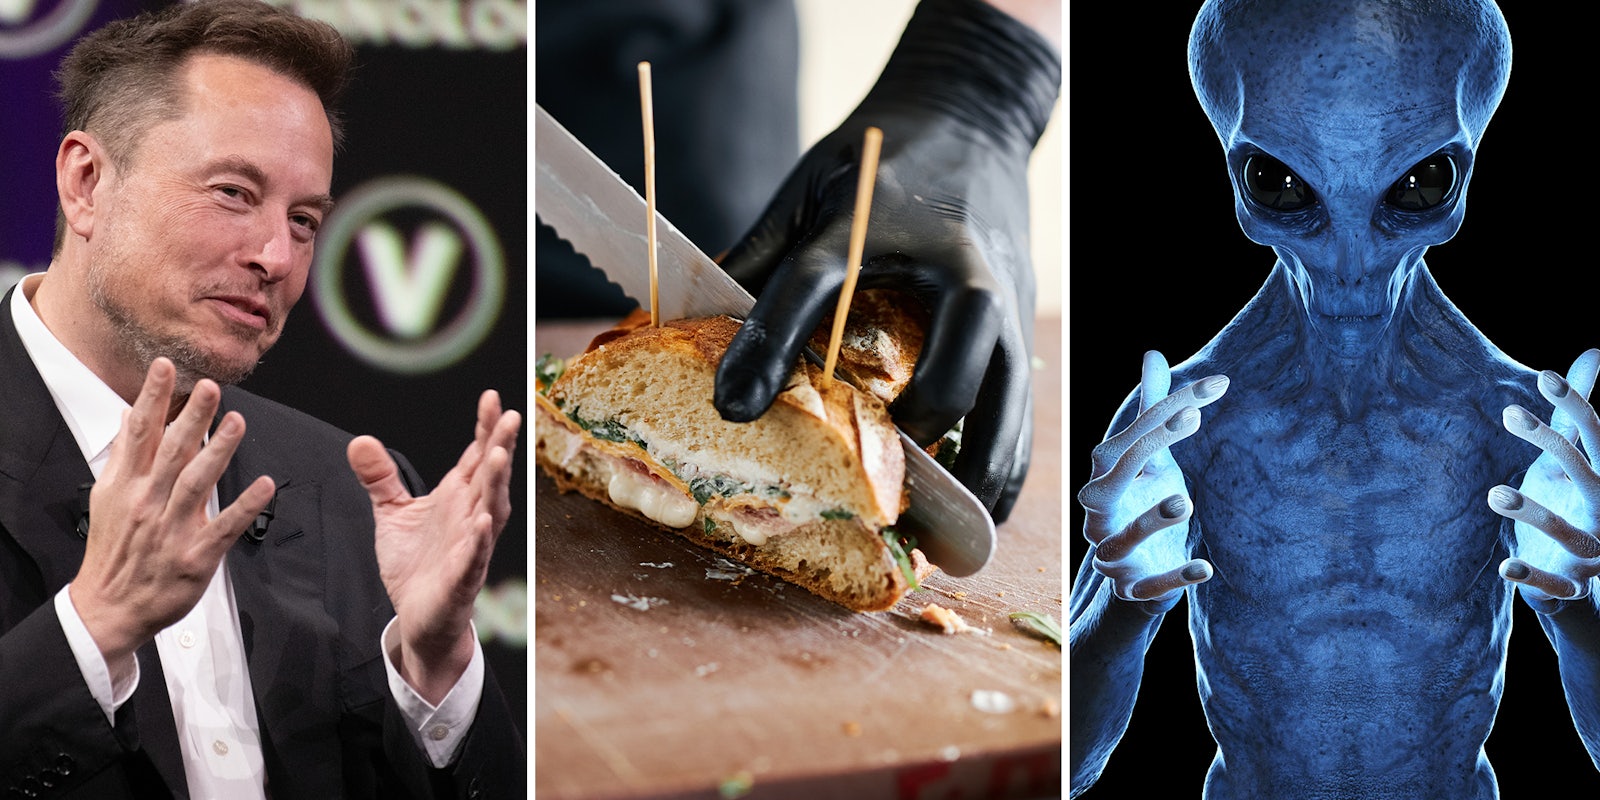 Elon Musk, Person wearing black gloves cutting sandwich. Blue alien with black eyes holding up hands